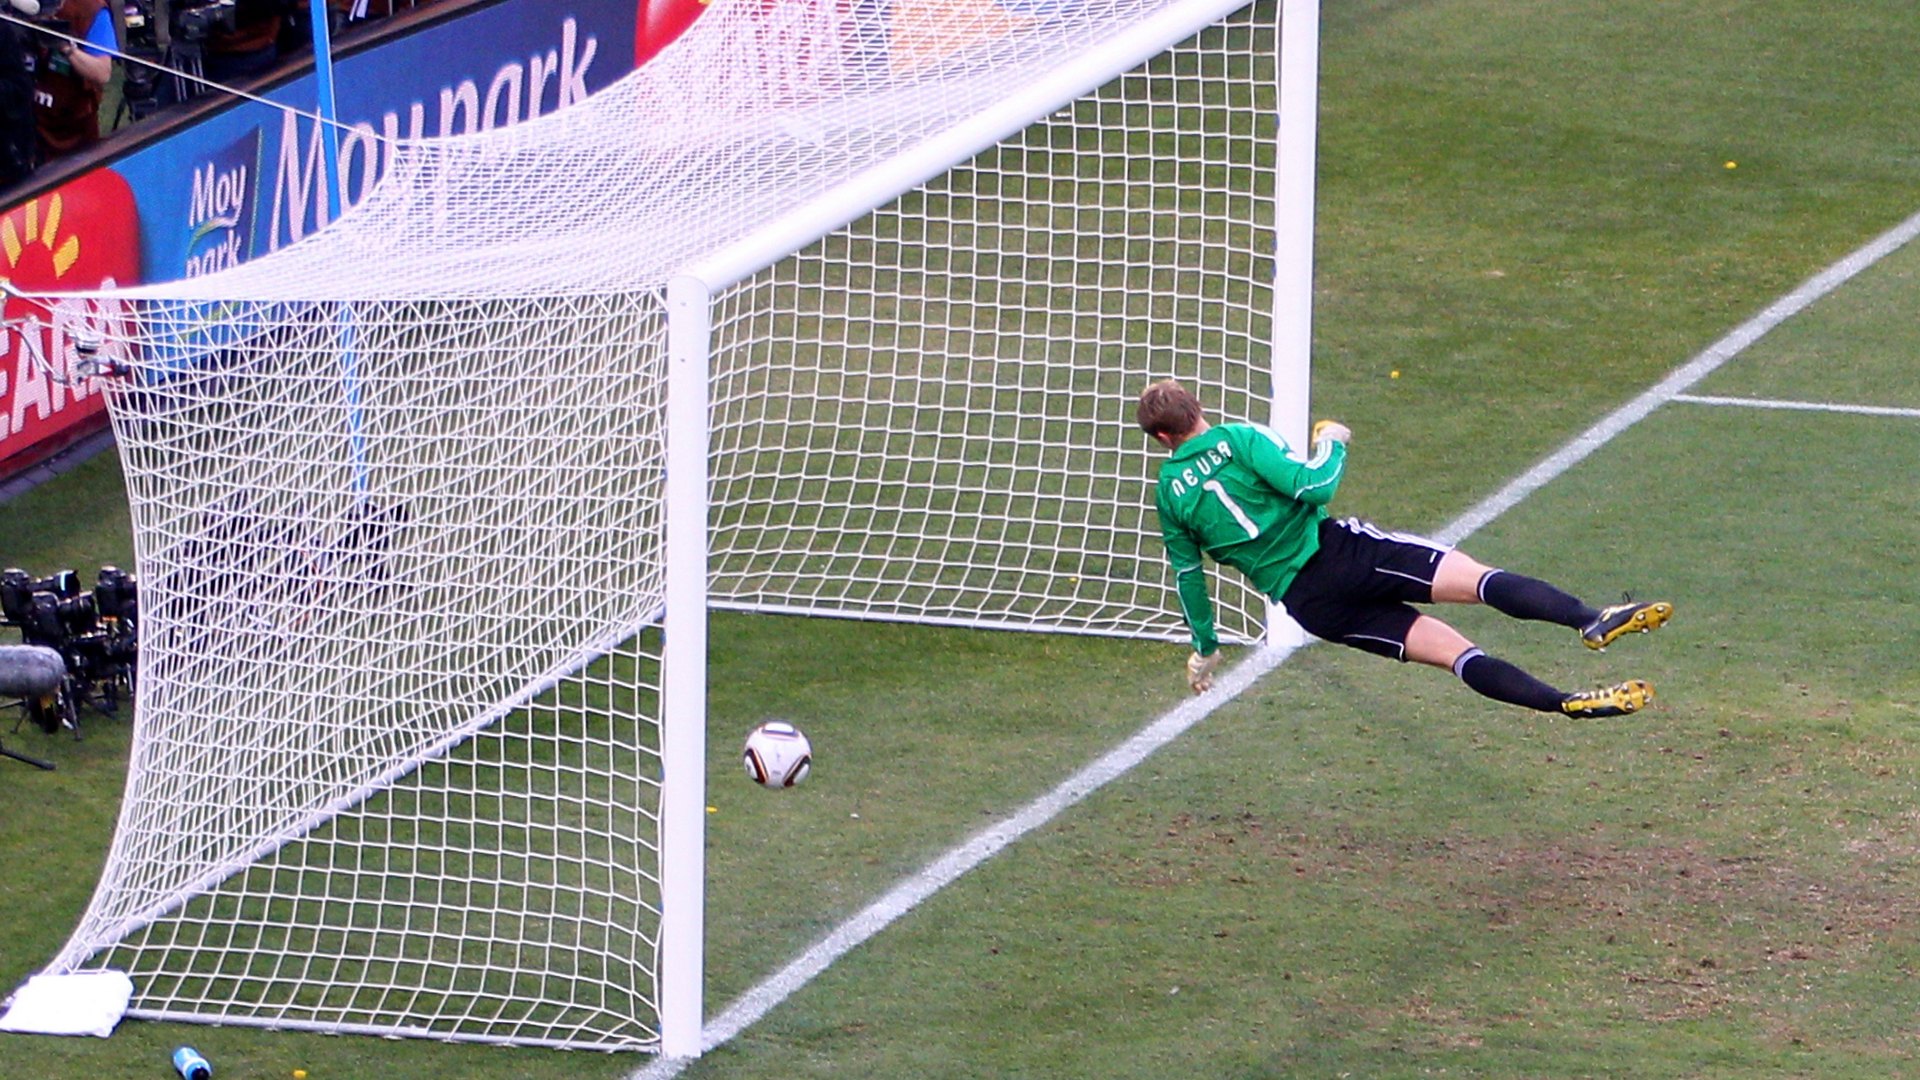 Frank Lampard disallowed goal against Germany WC 06272010